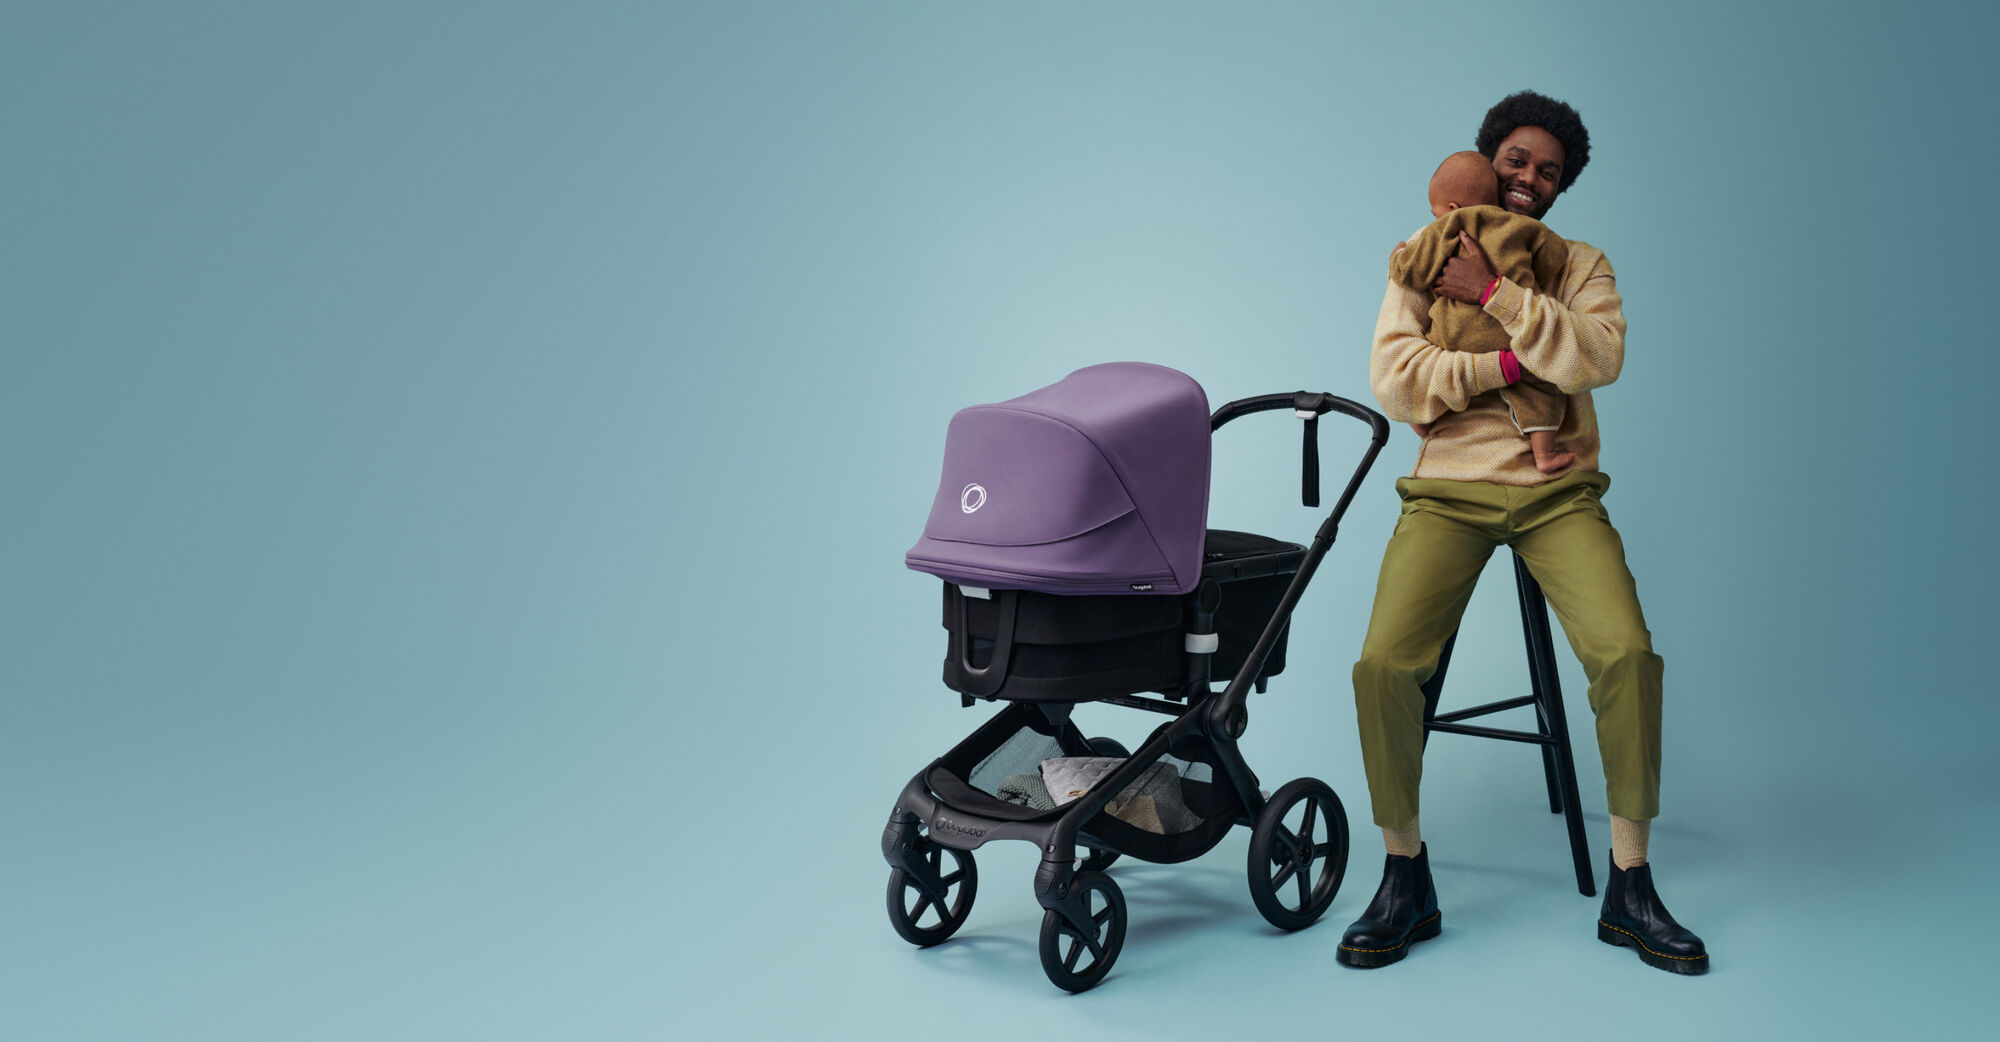 Comfort pushchairs for all terrains